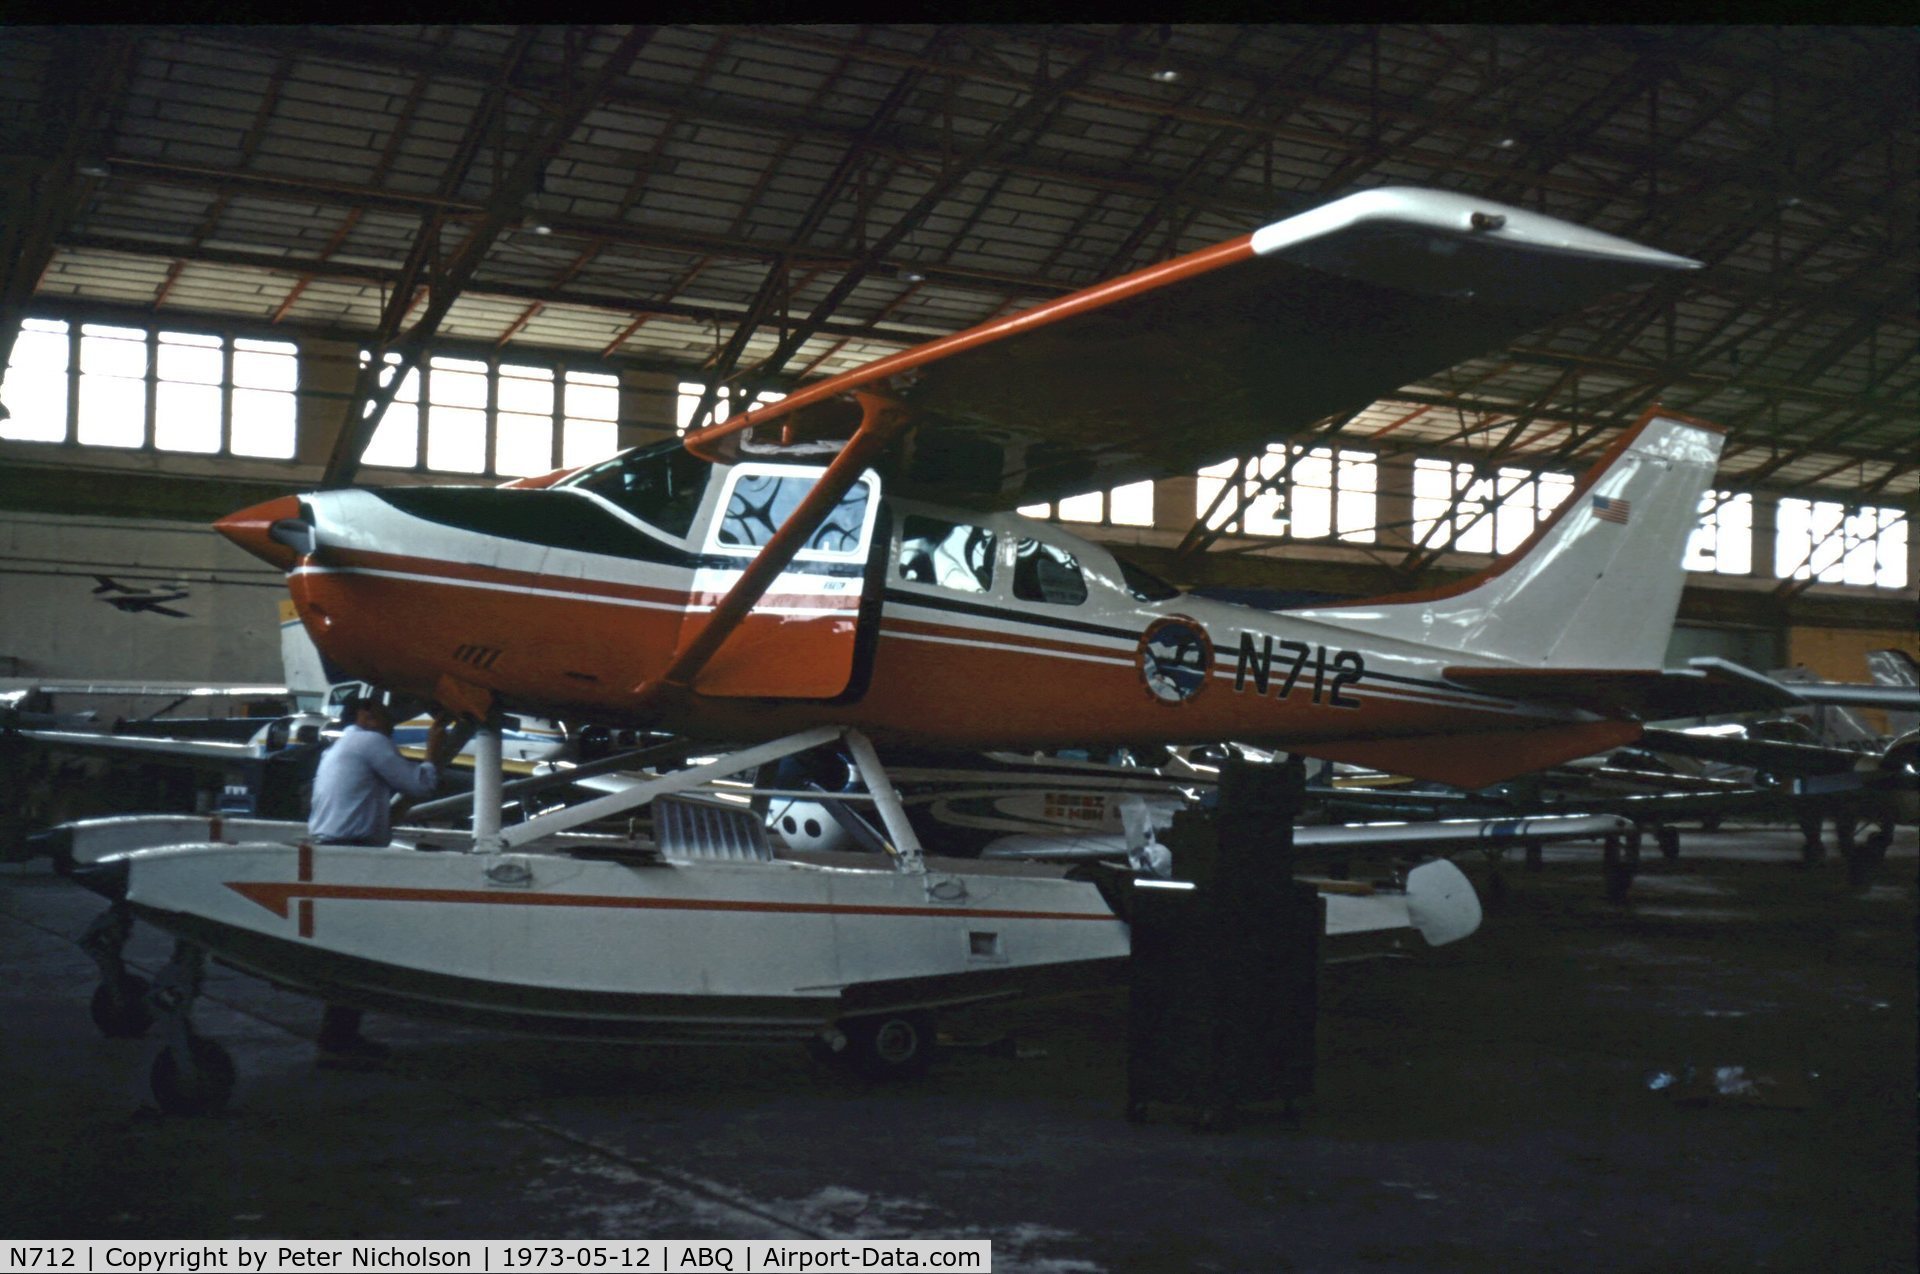 N712, 1972 Cessna U206F Stationair C/N U20601859, This Robertson STOL outfitted Stationair was used by the US Fish & Wildlife Service in 1973.